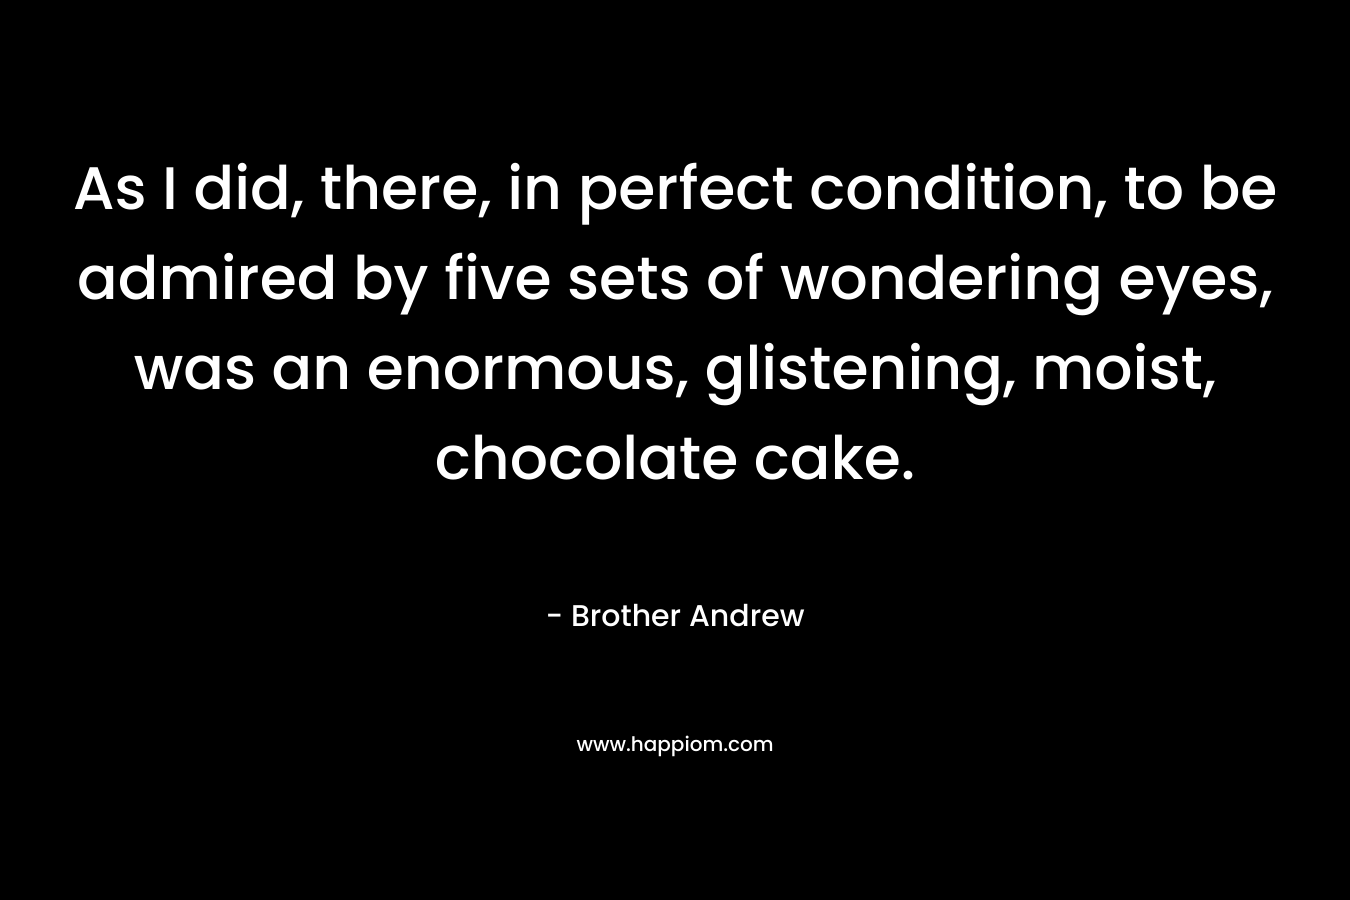 As I did, there, in perfect condition, to be admired by five sets of wondering eyes, was an enormous, glistening, moist, chocolate cake.